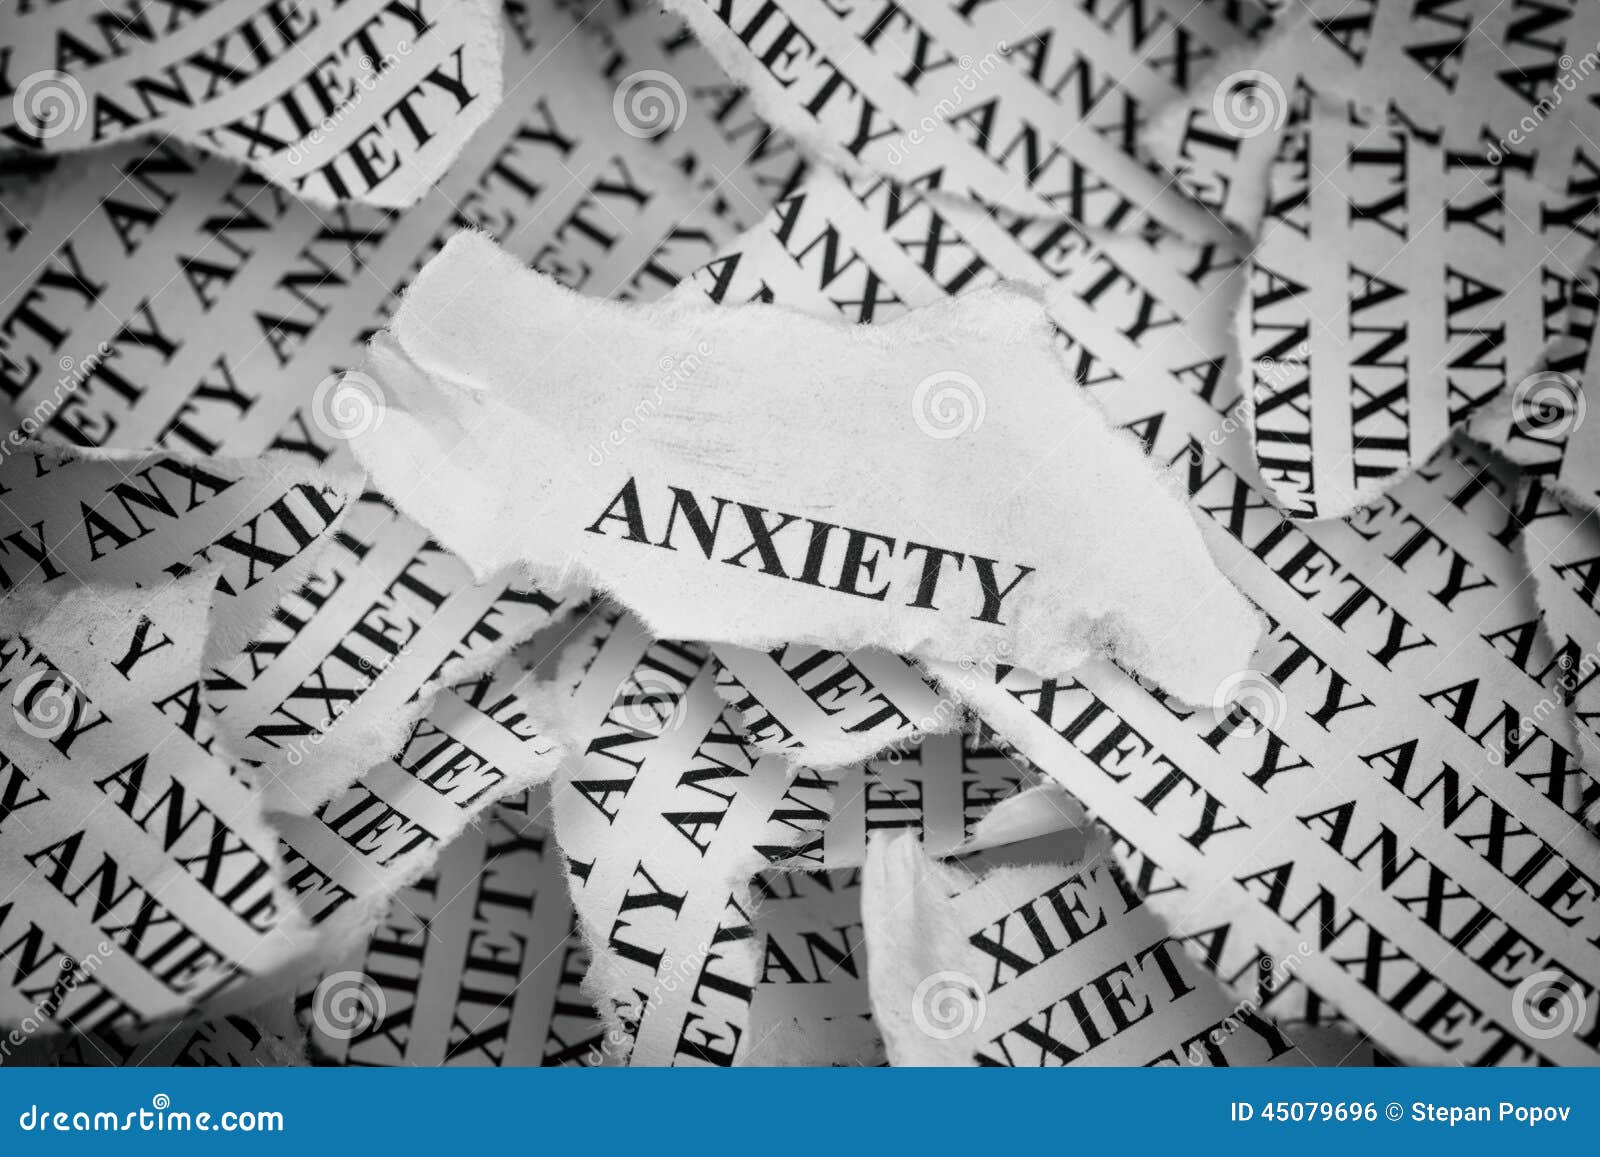 anxiety paper